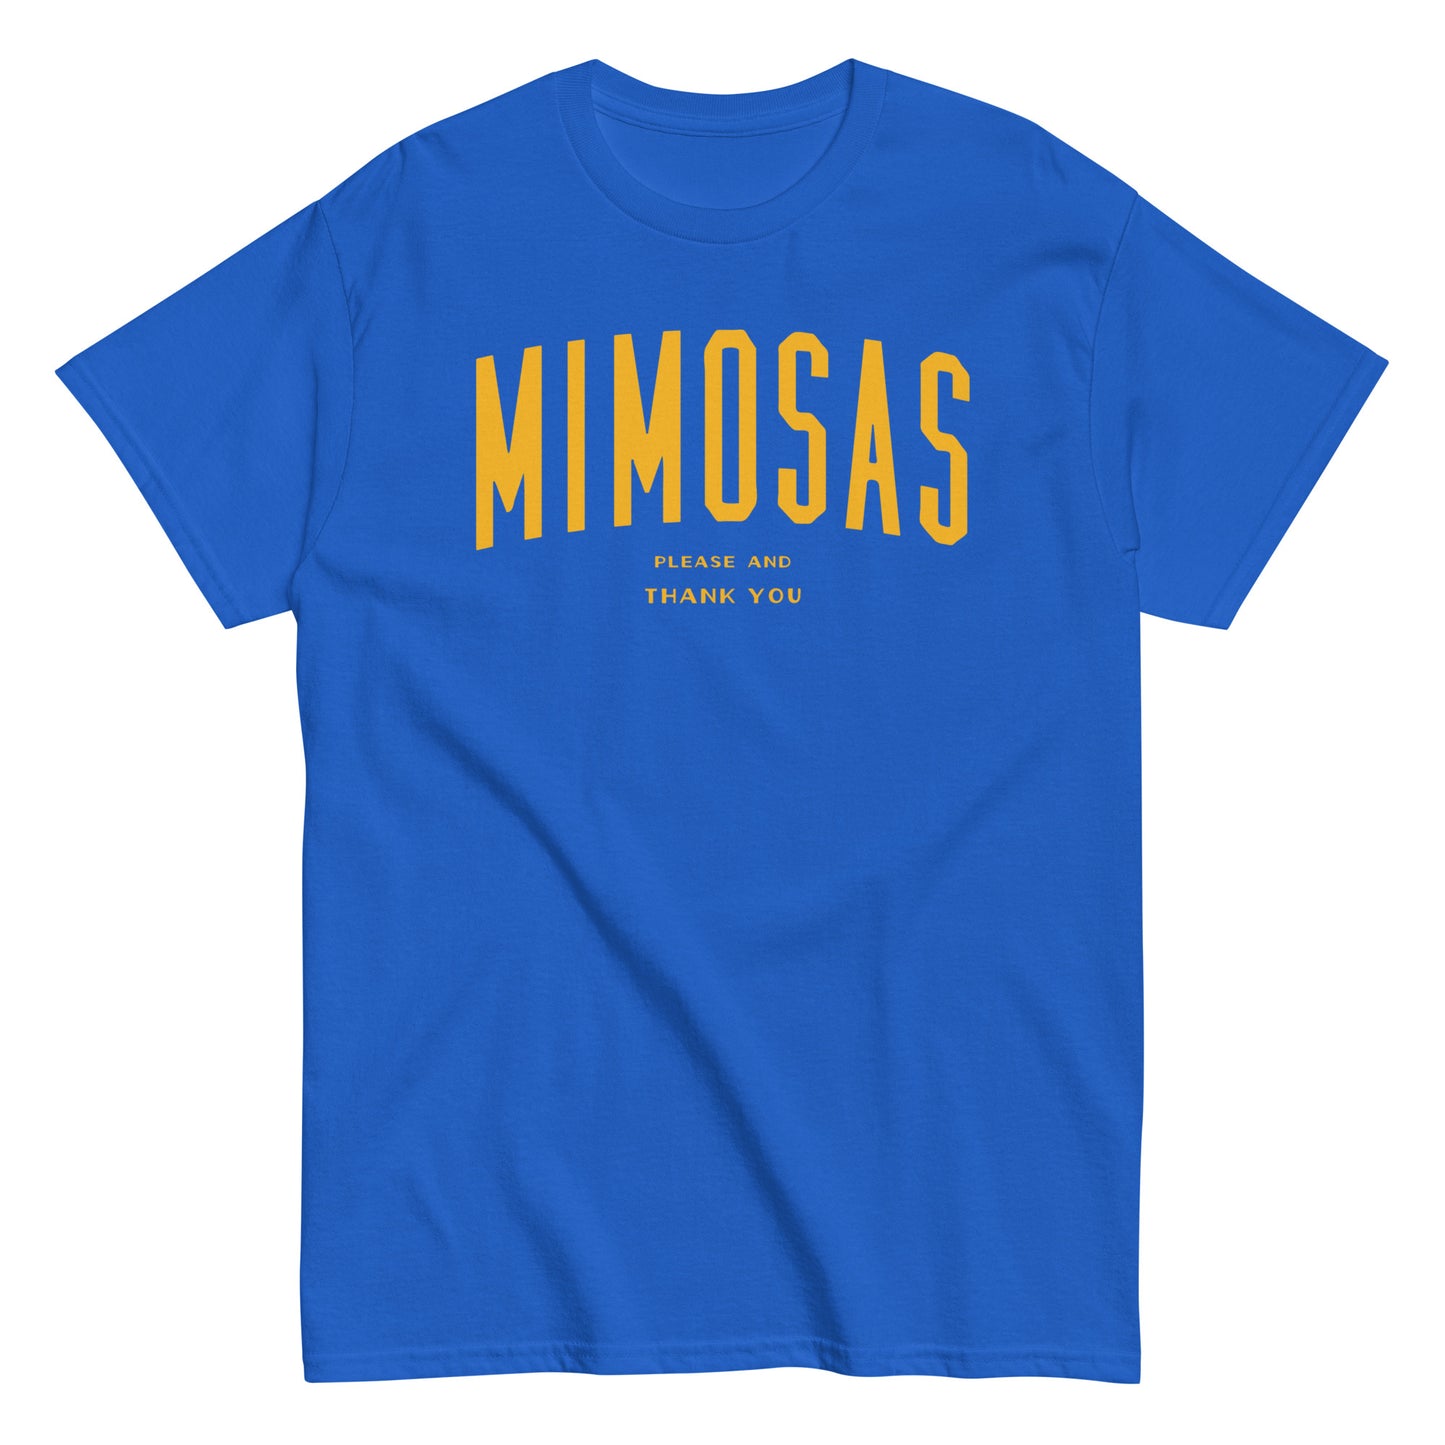 Mimosas Please And Thank You Men's Classic Tee